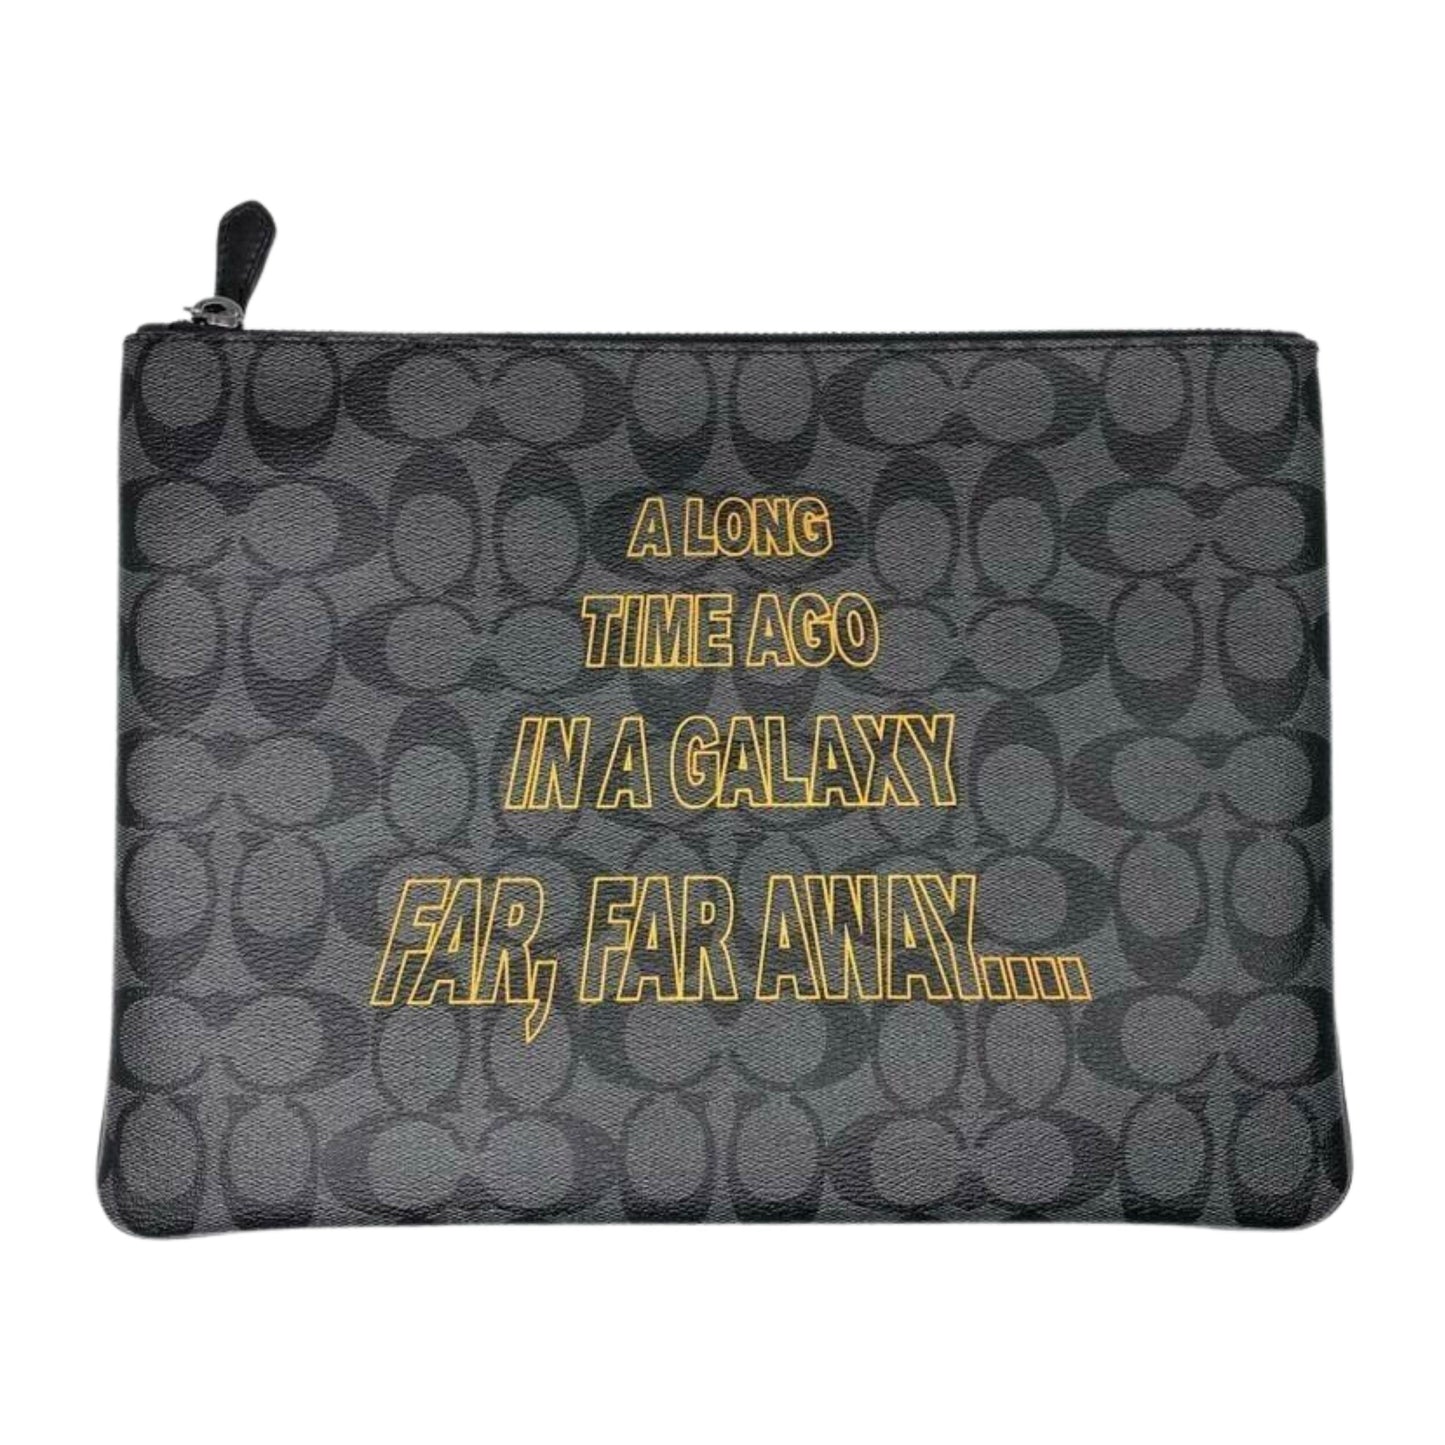 Coach x Star Wars Large Pouch Black Charcoal Signature Bag -F88119